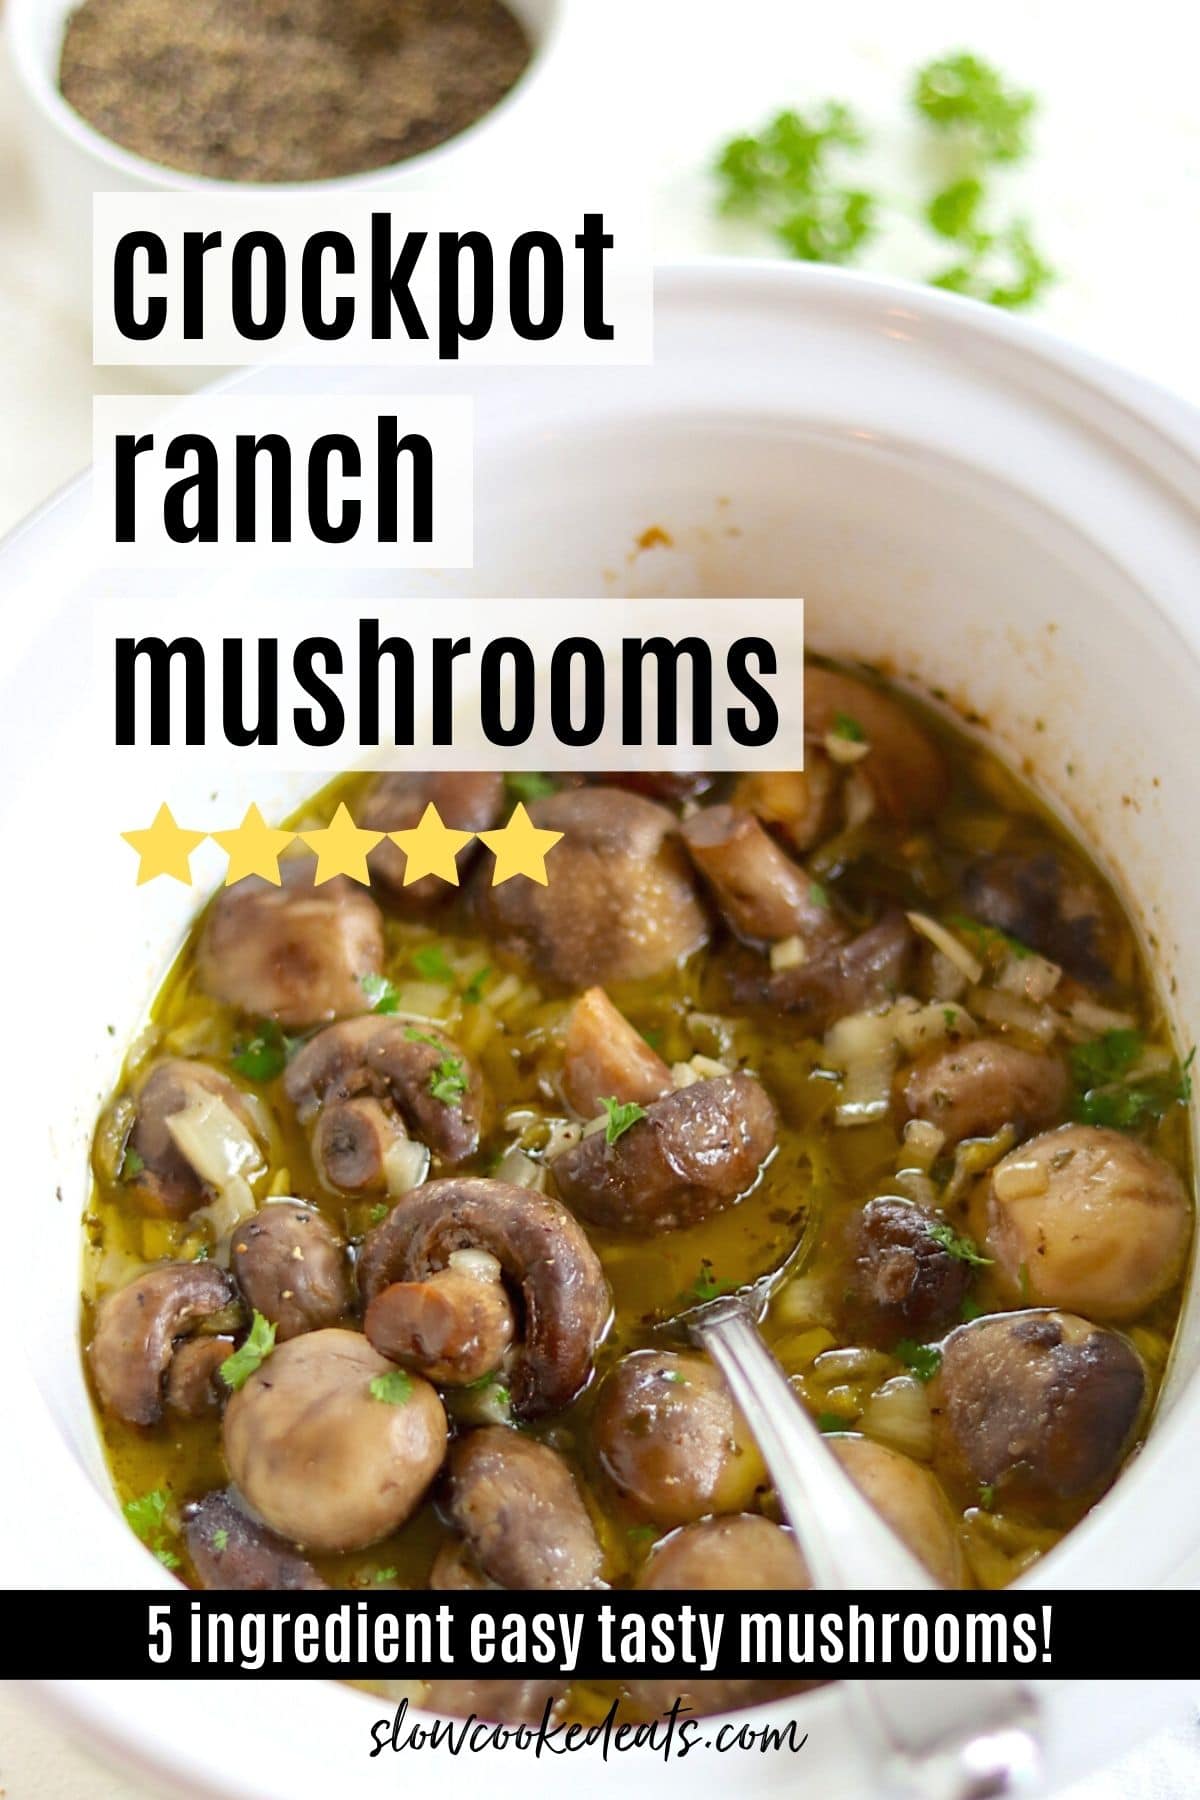 Pinterest pin with a white oval crockpot full of slow cooked ranch mushrooms.